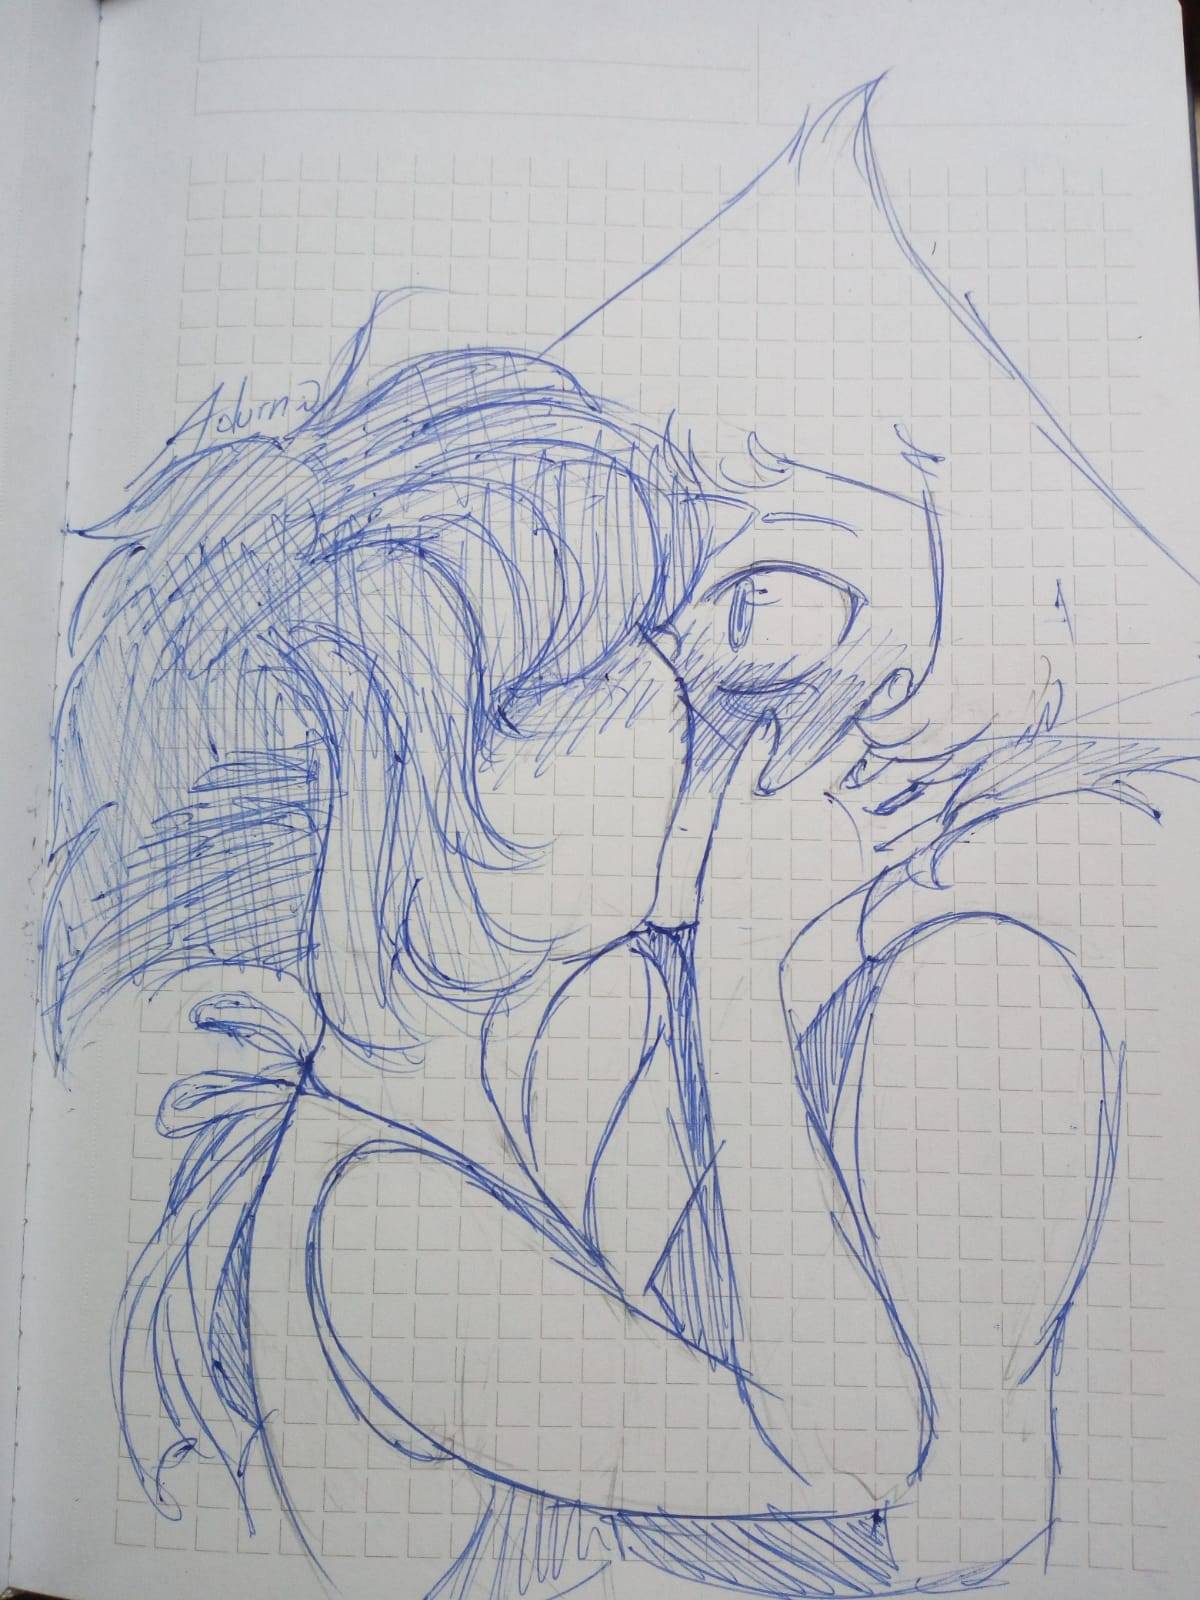 My Lapidot hype is SO real rn. (PS: Idk why Peri is so high tho. She probably stands on something xd)